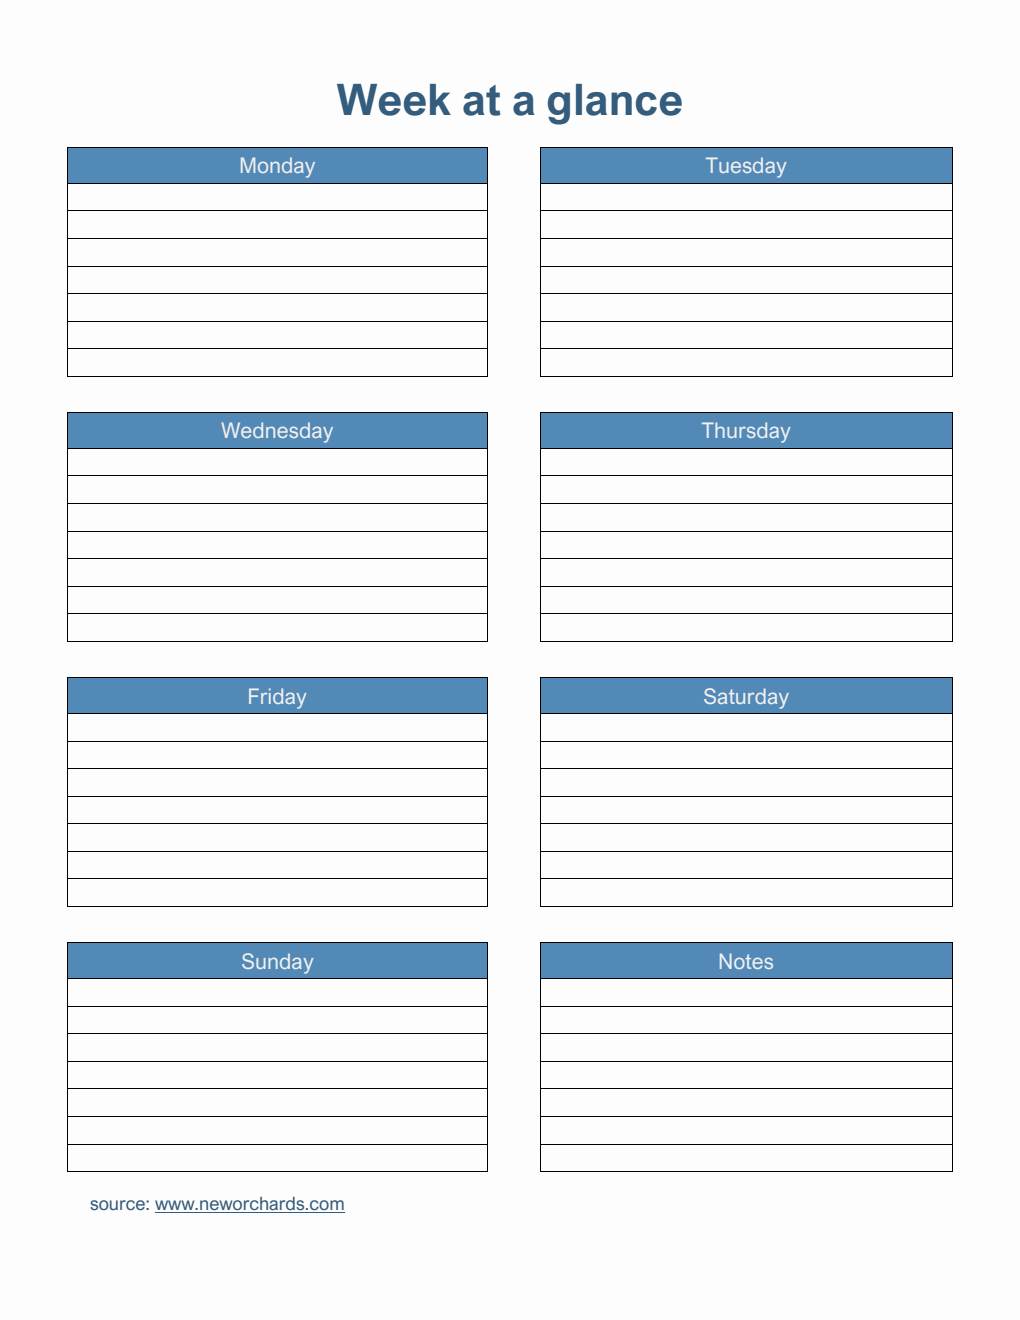 Basic Week at a Glance Template (Word)